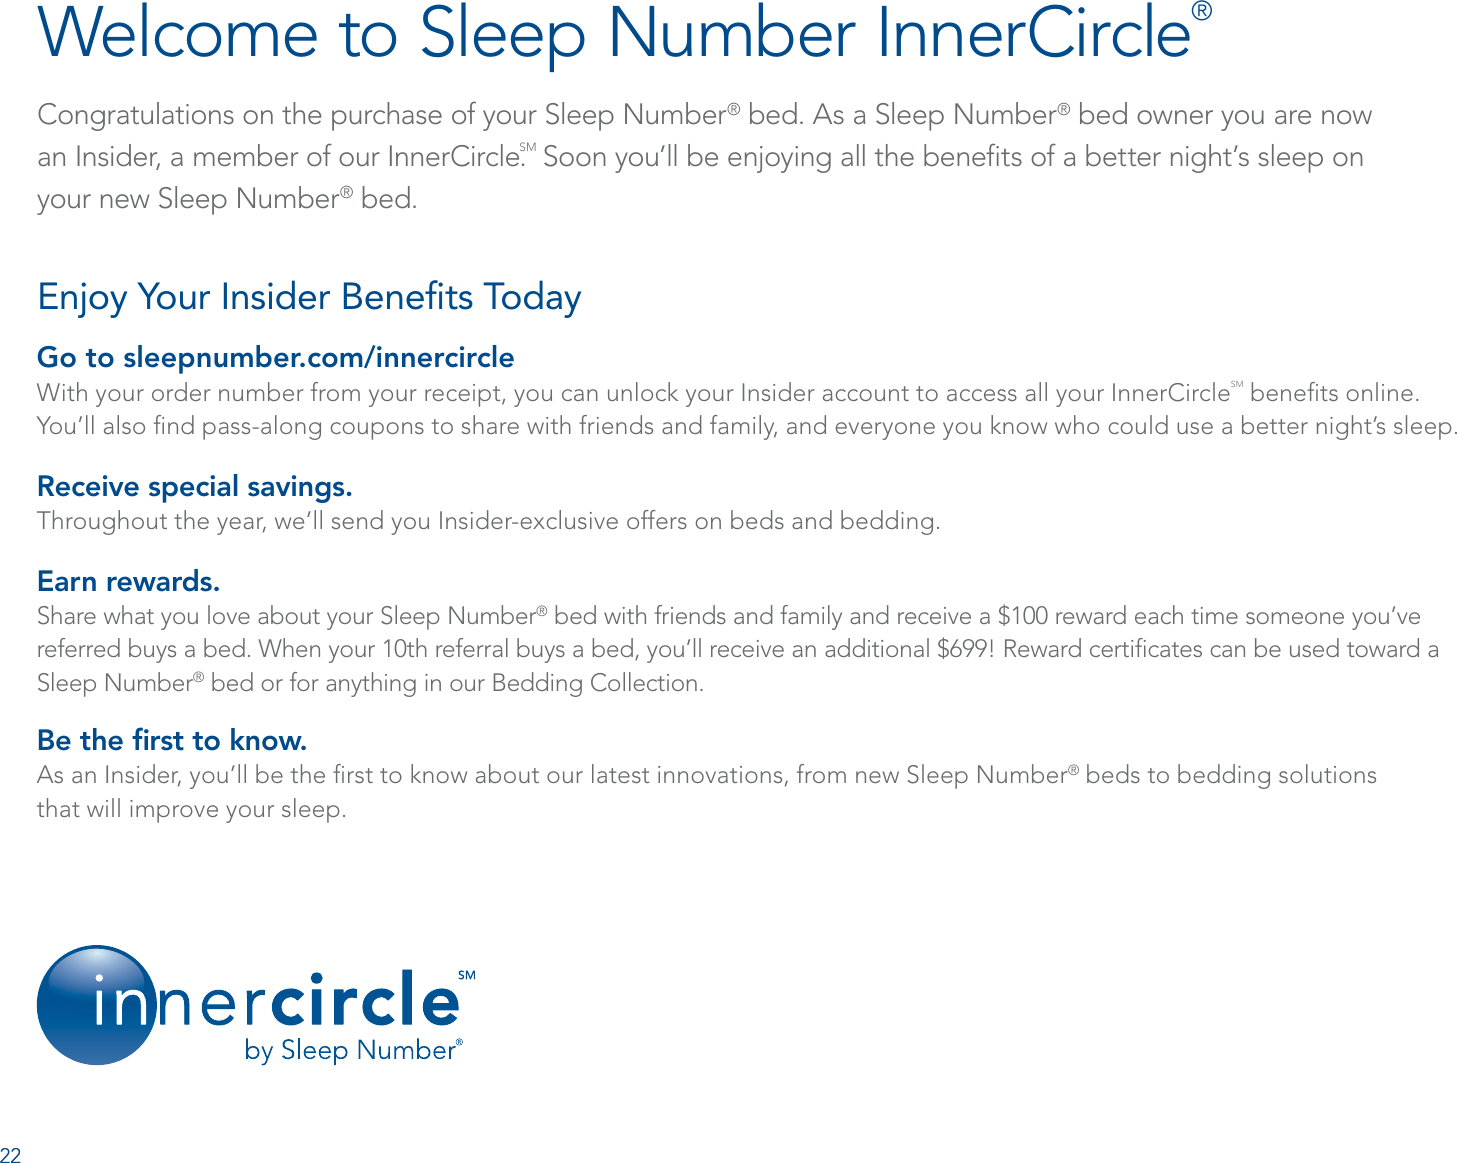 Congratulations on the purchase of your Sleep Number® bed. As a Sleep Number® bed owner you are now  an Insider, a member of our InnerCircle.SM Soon you’ll be enjoying all the beneﬁts of a better night’s sleep on  your new Sleep Number® bed. Welcome to Sleep Number InnerCircle®Go to sleepnumber.com/innercircleWith your order number from your receipt, you can unlock your Insider account to access all your InnerCircleSM beneﬁts online.  You’ll also ﬁnd pass-along coupons to share with friends and family, and everyone you know who could use a better night’s sleep.Receive special savings. Throughout the year, we’ll send you Insider-exclusive offers on beds and bedding.Earn rewards. Share what you love about your Sleep Number® bed with friends and family and receive a $100 reward each time someone you’ve referred buys a bed. When your 10th referral buys a bed, you’ll receive an additional $699! Reward certiﬁcates can be used toward a Sleep Number® bed or for anything in our Bedding Collection.Be the ﬁrst to know. As an Insider, you’ll be the ﬁrst to know about our latest innovations, from new Sleep Number® beds to bedding solutions  that will improve your sleep.Enjoy Your Insider Beneﬁts Today 2222